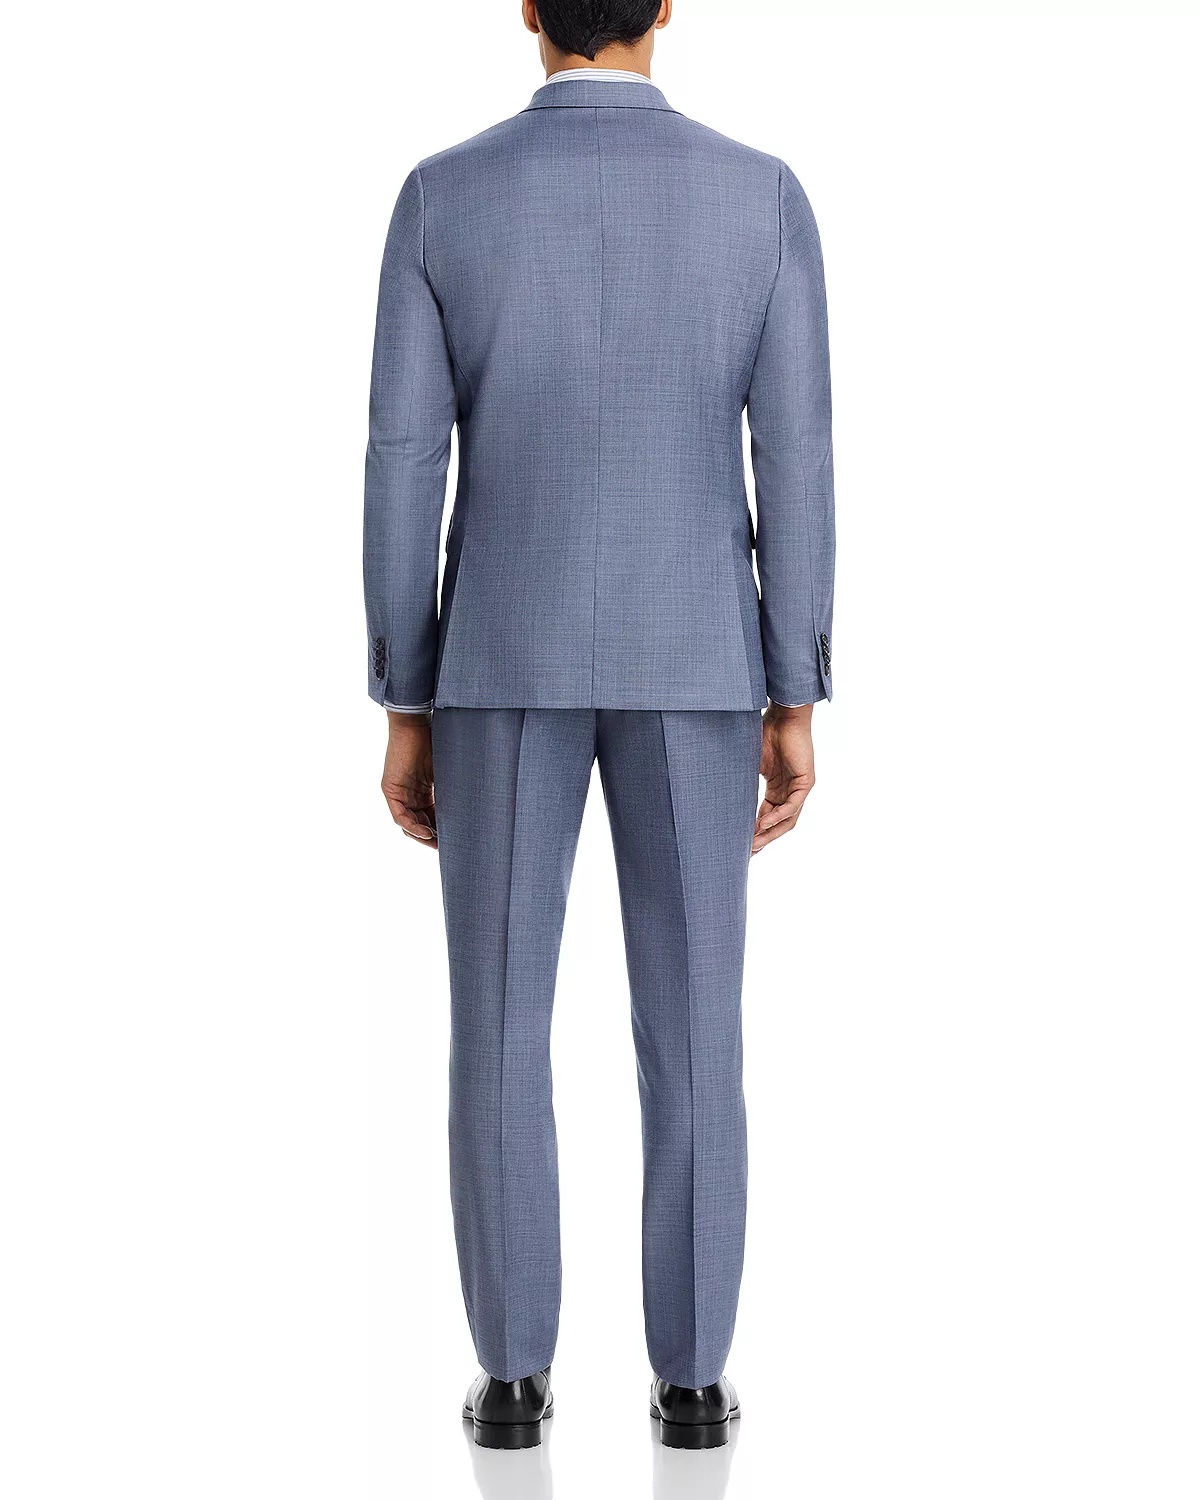 Brierly Sharkskin Tailored Fit Two Button Suit - 4